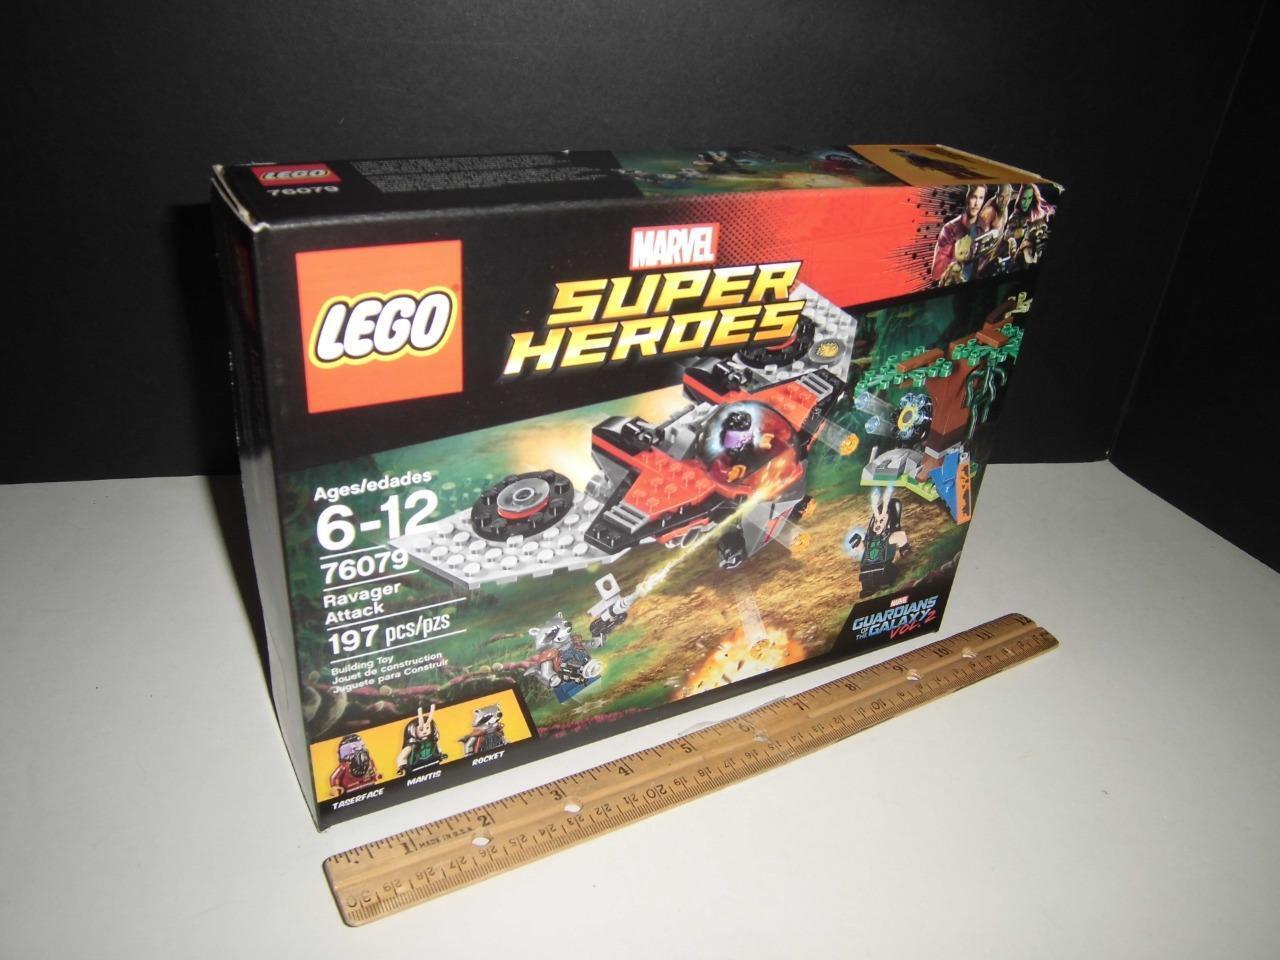 Marvel Ravager Attack - Lego 76079 - Sealed Box - 197 Pieces - Retired